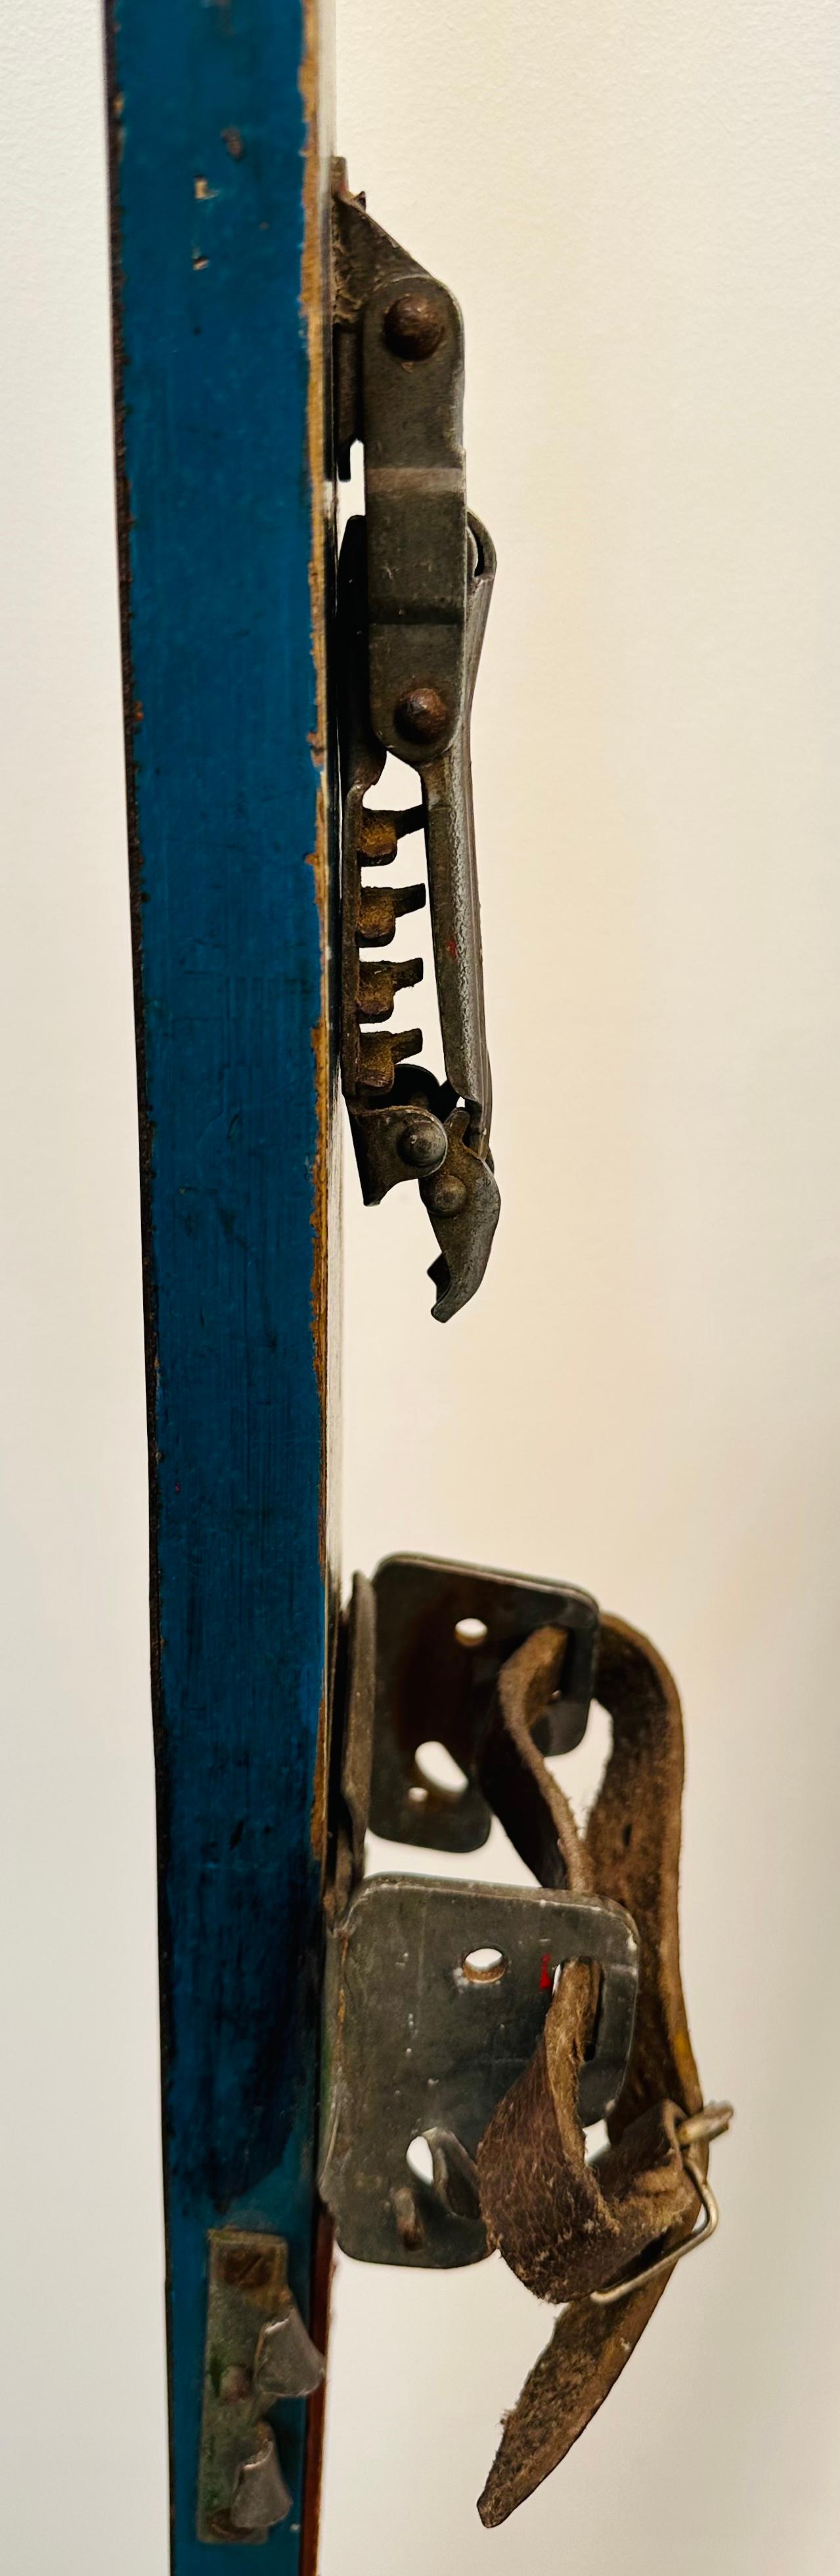 Metal Vintage Circa 1950s Wooden Skis with Bindings by Spezial Schichten Hohnberg For Sale